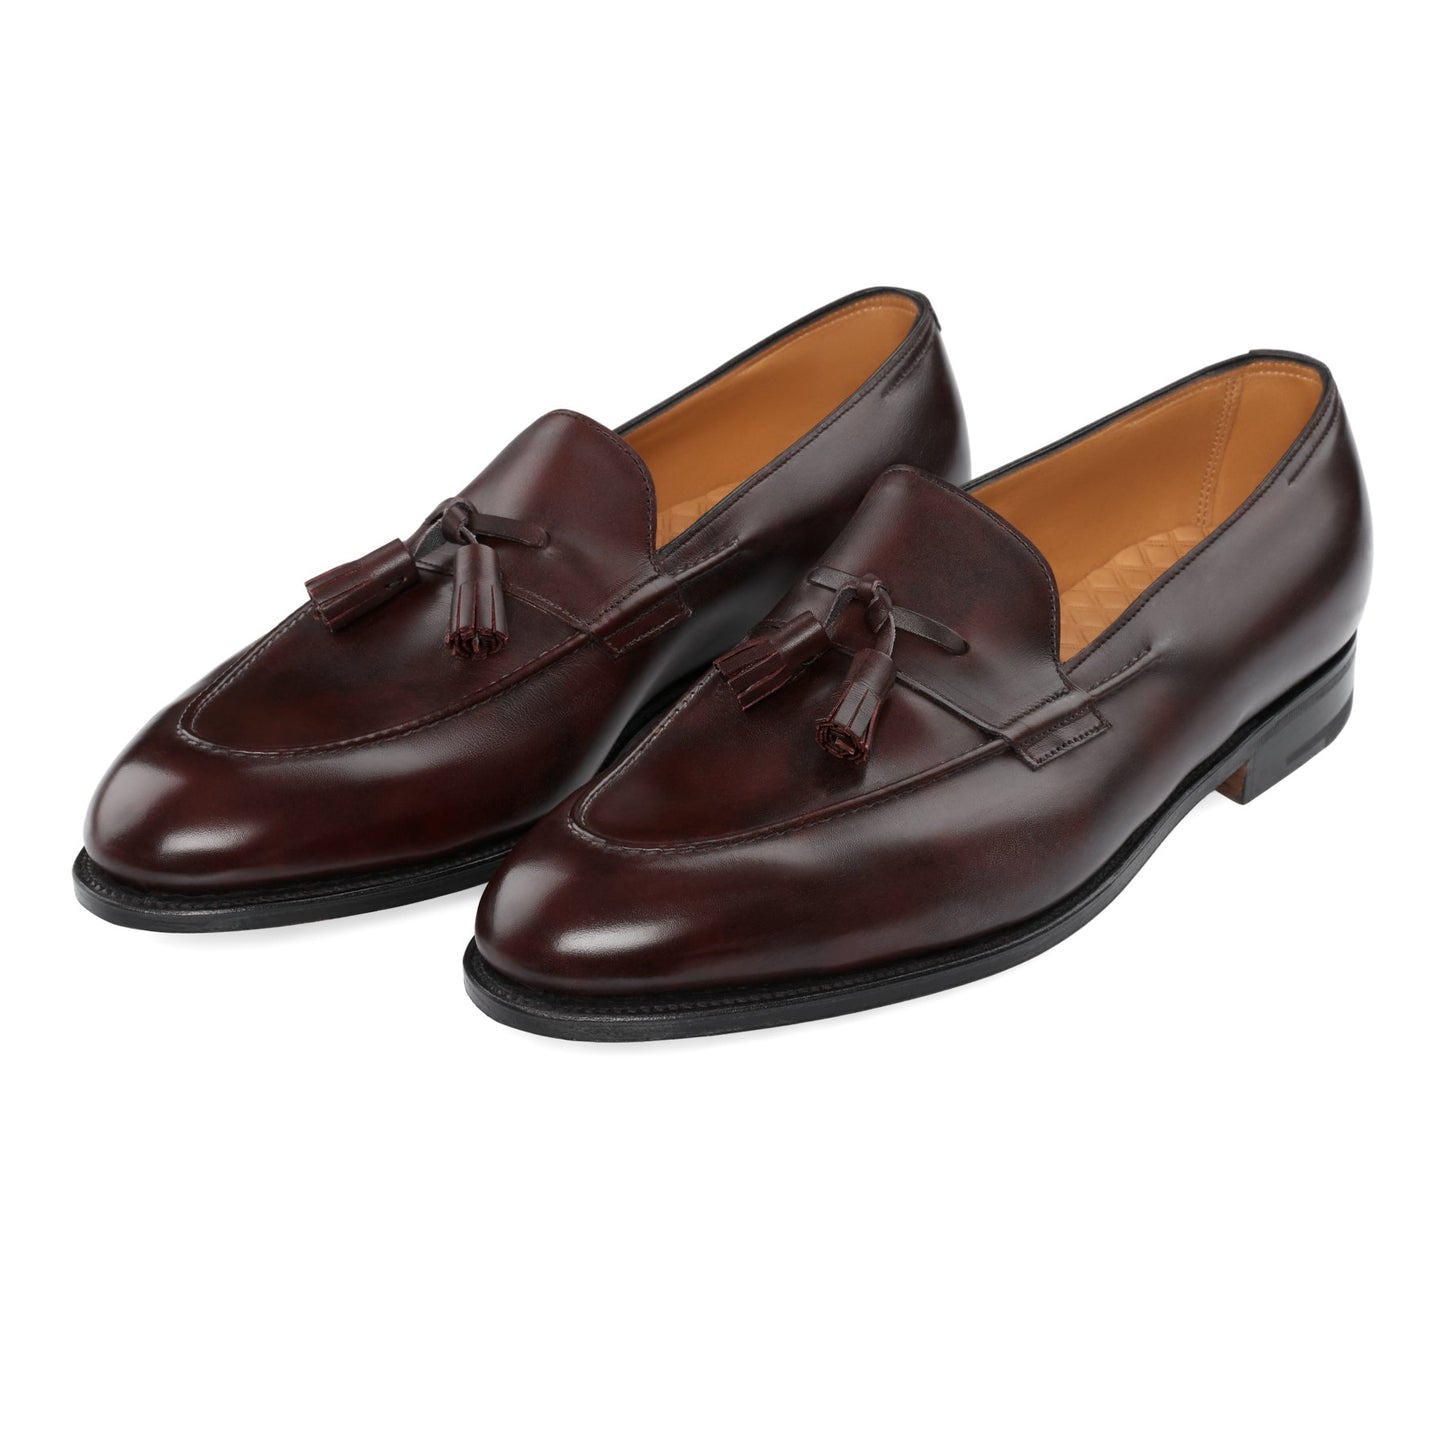 John Lobb "Callington" Leather Loafer with Hand-Stitched Apron in Plum Red - SARTALE